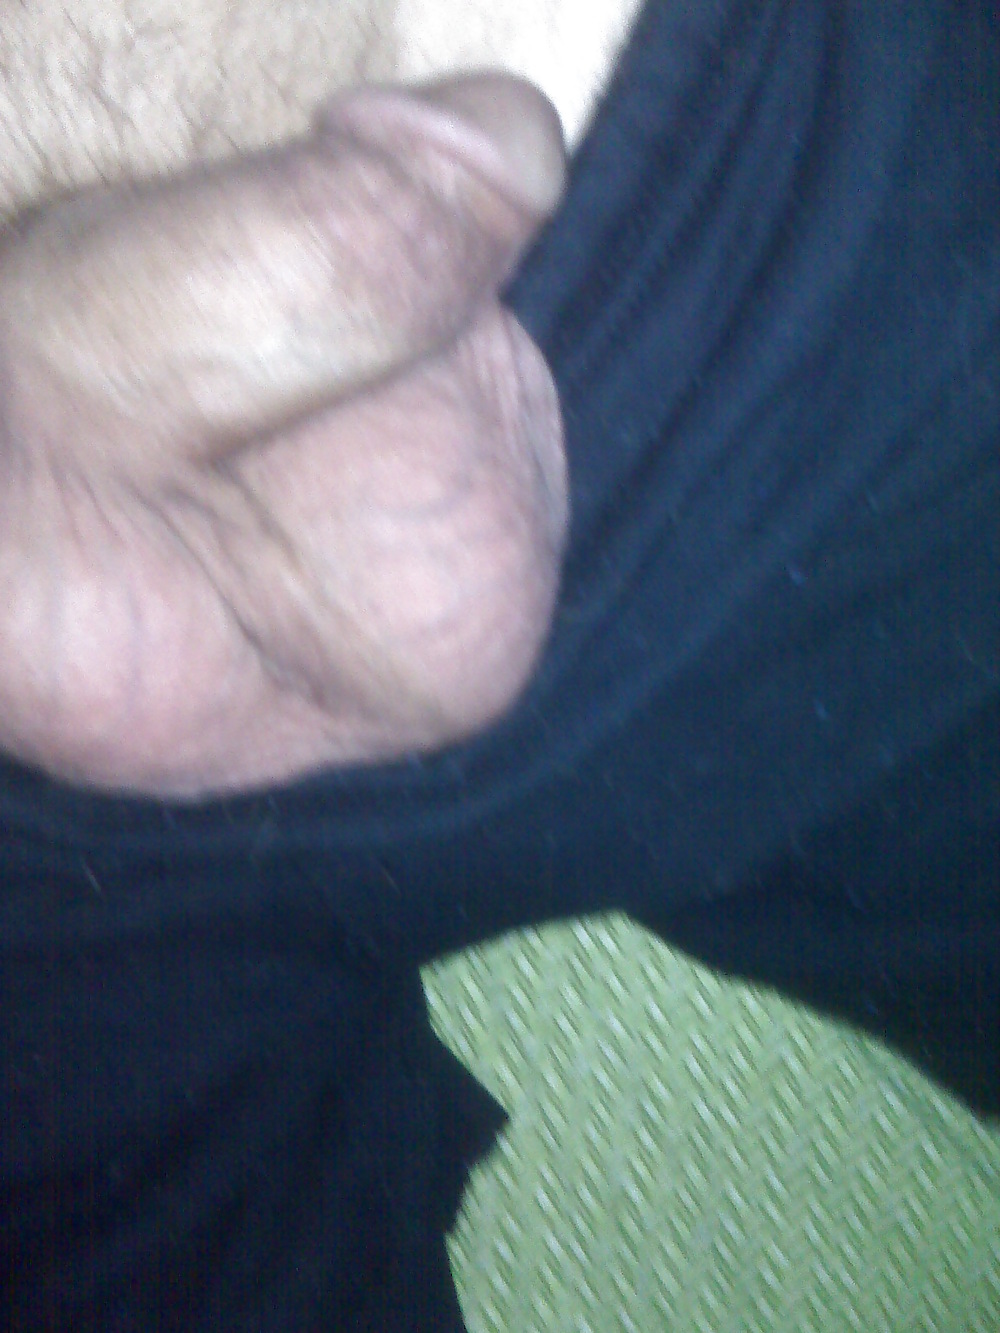 My Buddys dick while he is. #15558952